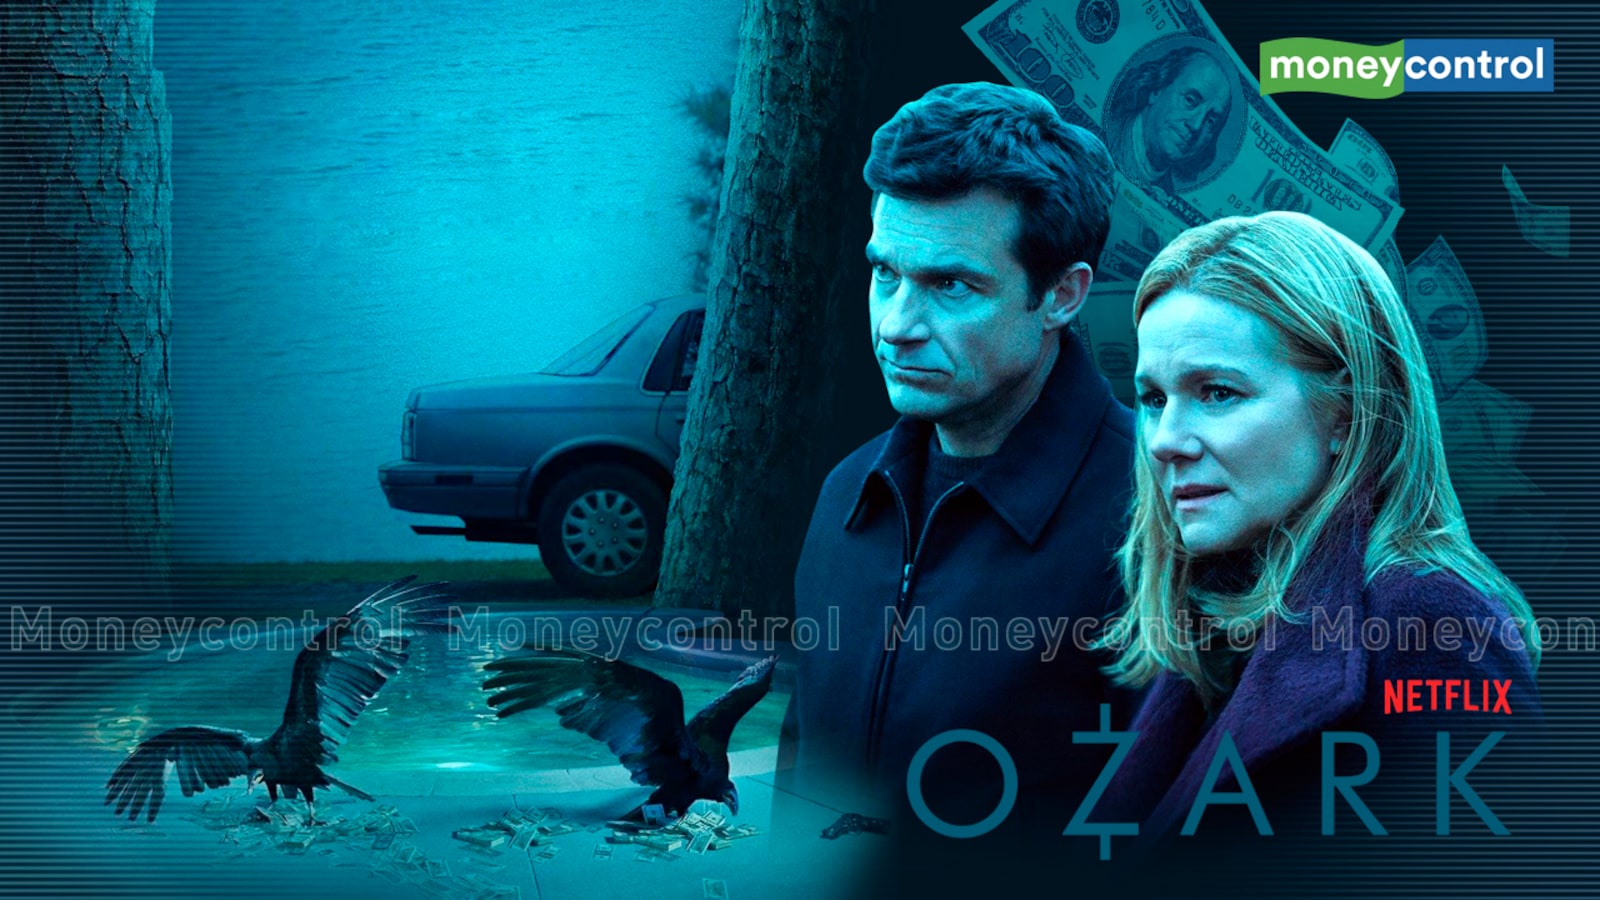 Ozarks TV Shows Poster for Sale by TrendsZone07